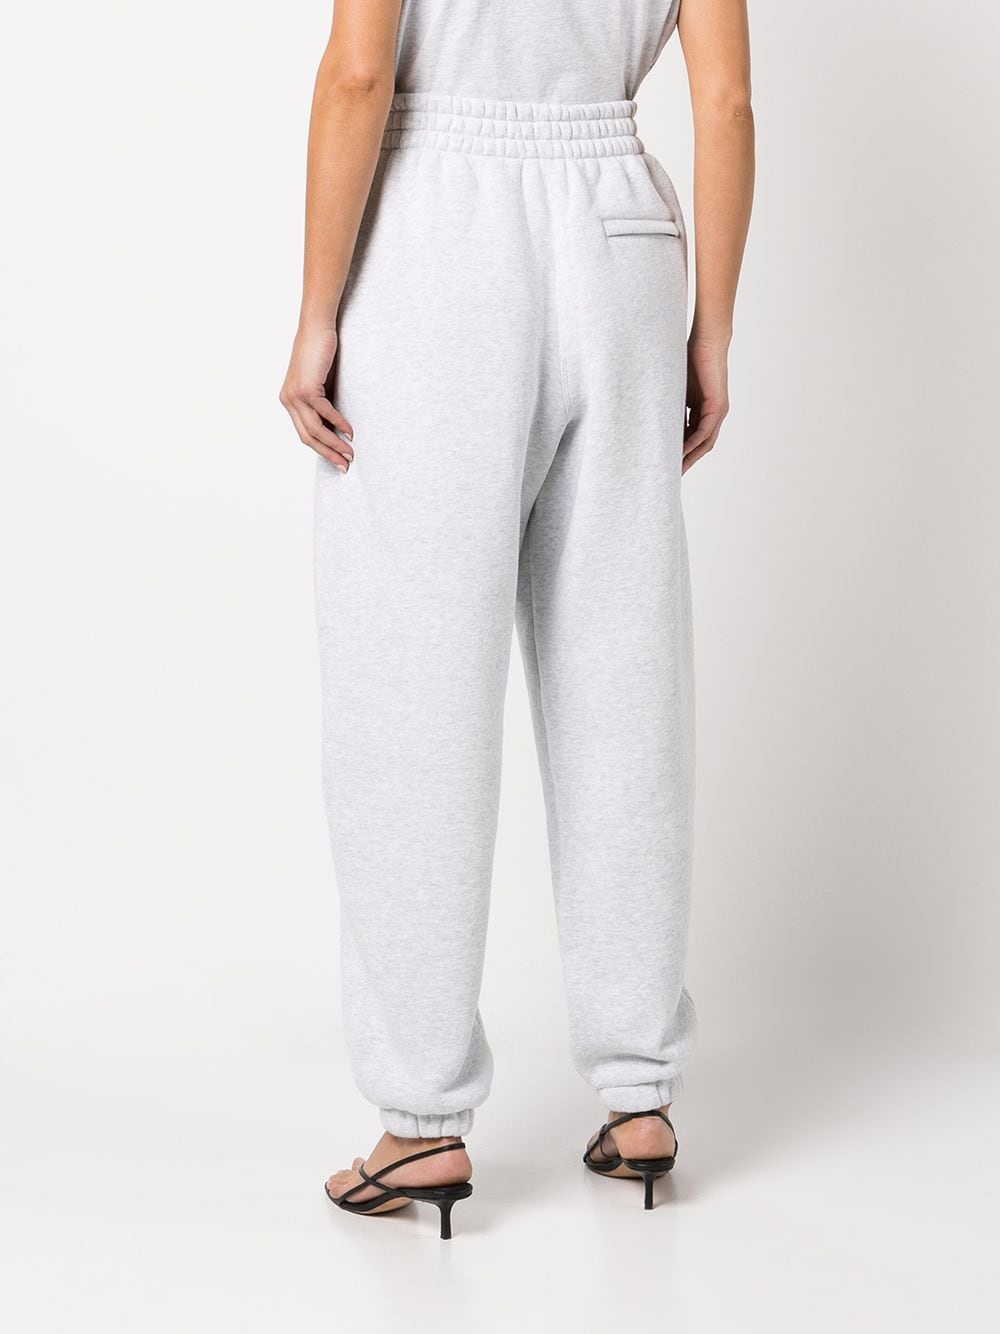 T BY ALEXANDER WANG Women Essential Terry Classic Sweatpant Puff Paint Logo